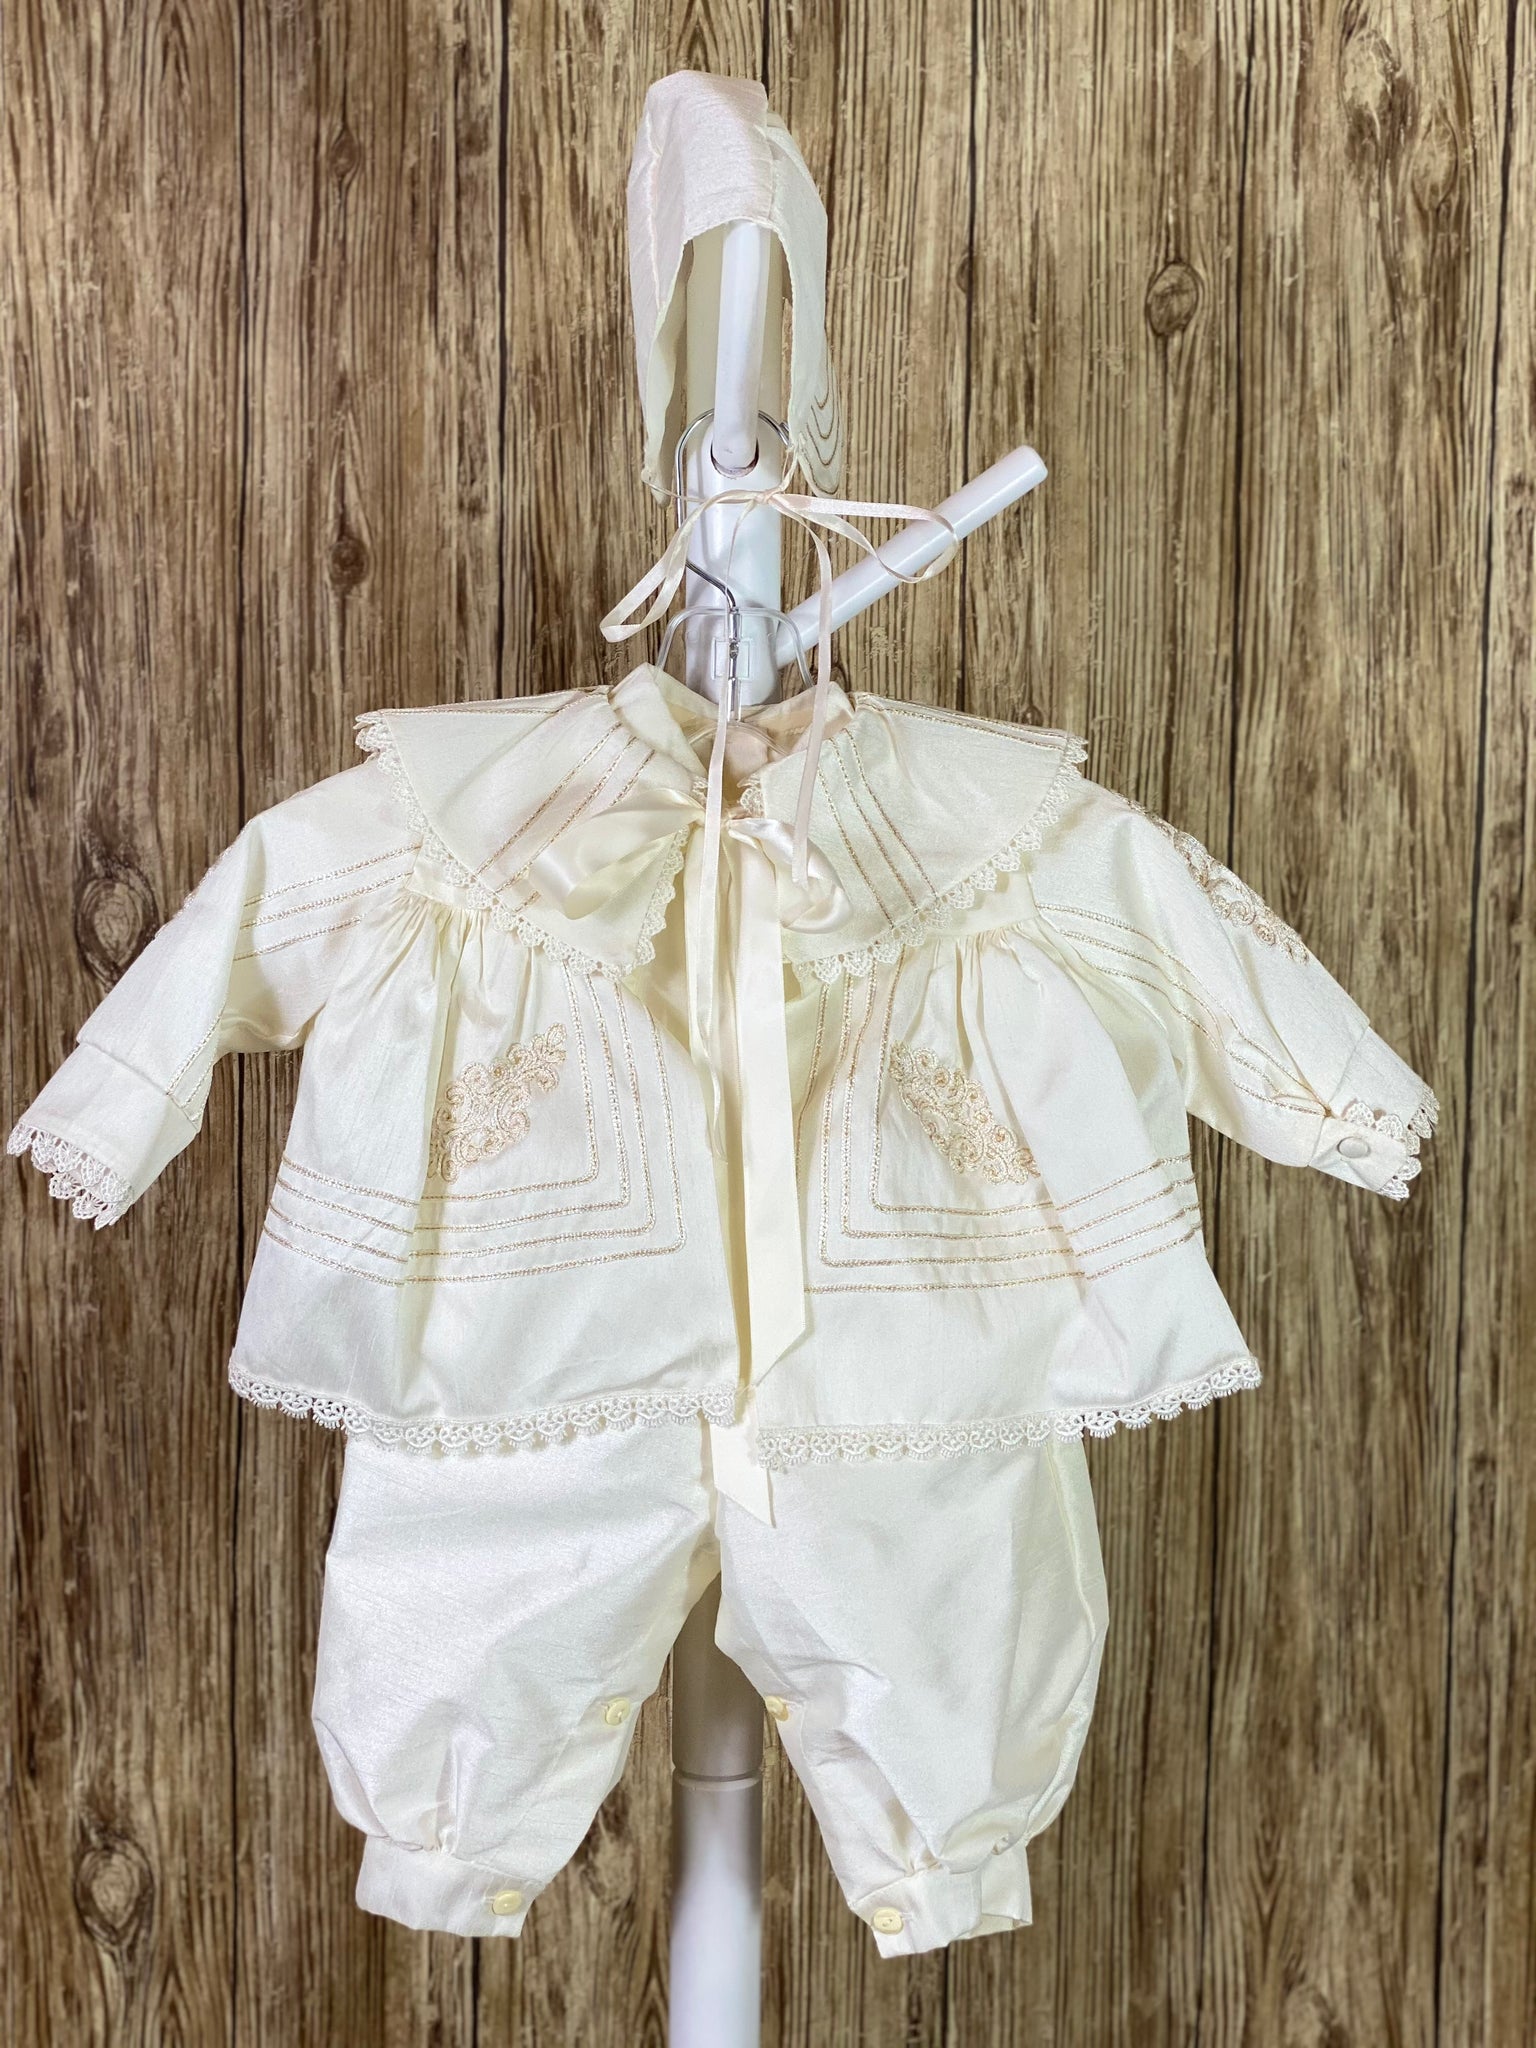 IVORY  3-piece ivory set with romper, jacket, and bonnet Solid ivory satin romper with buttons along inside of legs Collard, short sleeve romper Champagne rope detailing in L shape on jacket front Champagne rope detailing vertical along jacket collar and sleeves Embroidered appliques on jacket front Embroidered trim along jacket, collar, and sleeve edging Ribbon closure on jacket Button closure on back of romper Thin ribbon for tie on bonnet